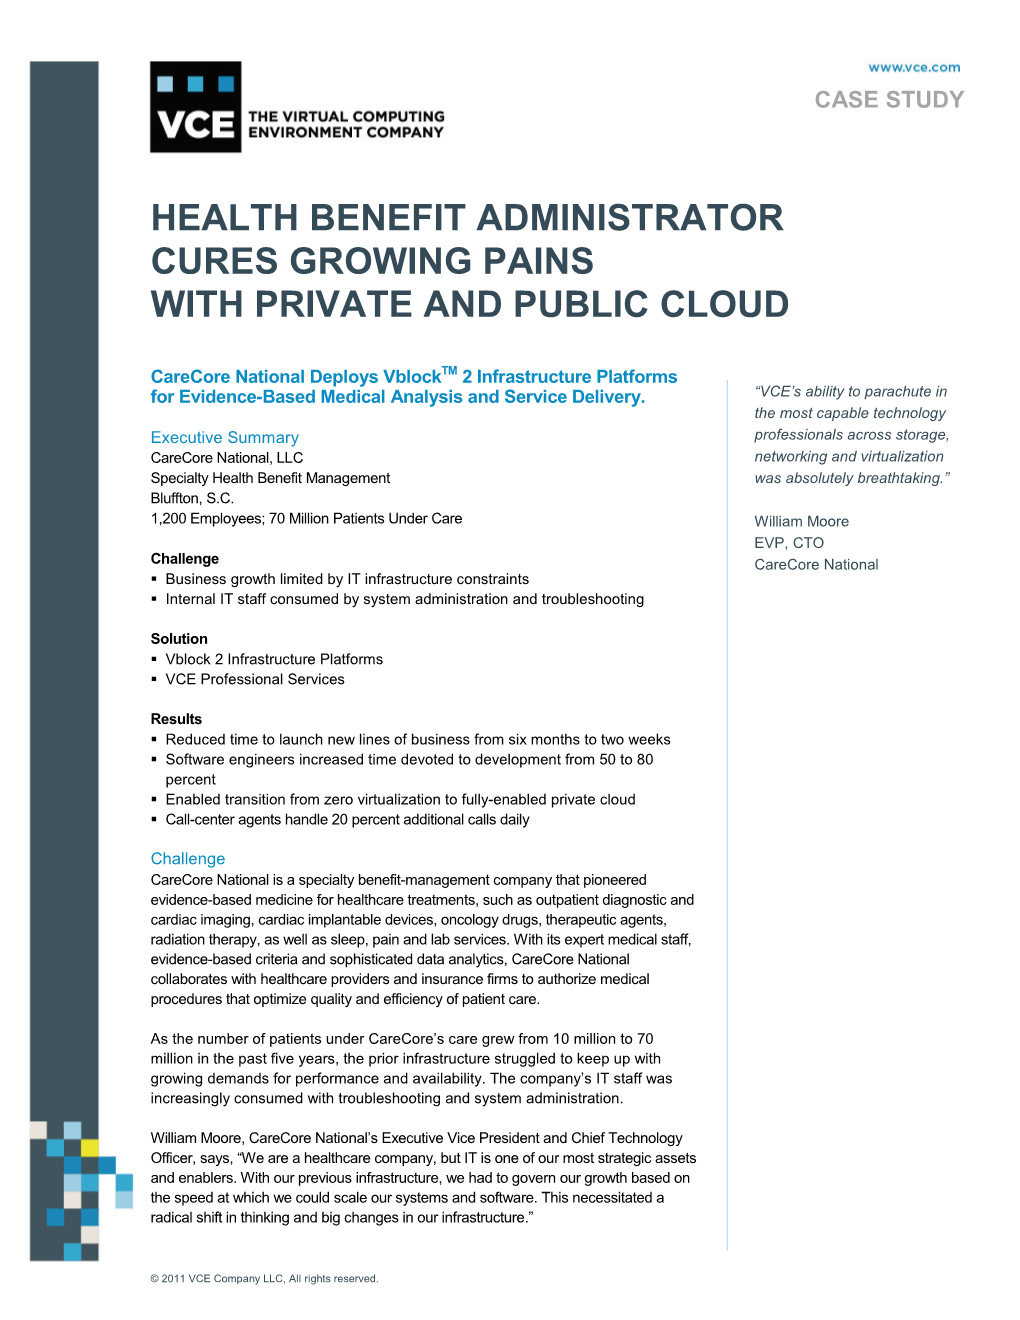 Carecore National Cures Growing Pains with Private and Public Cloud